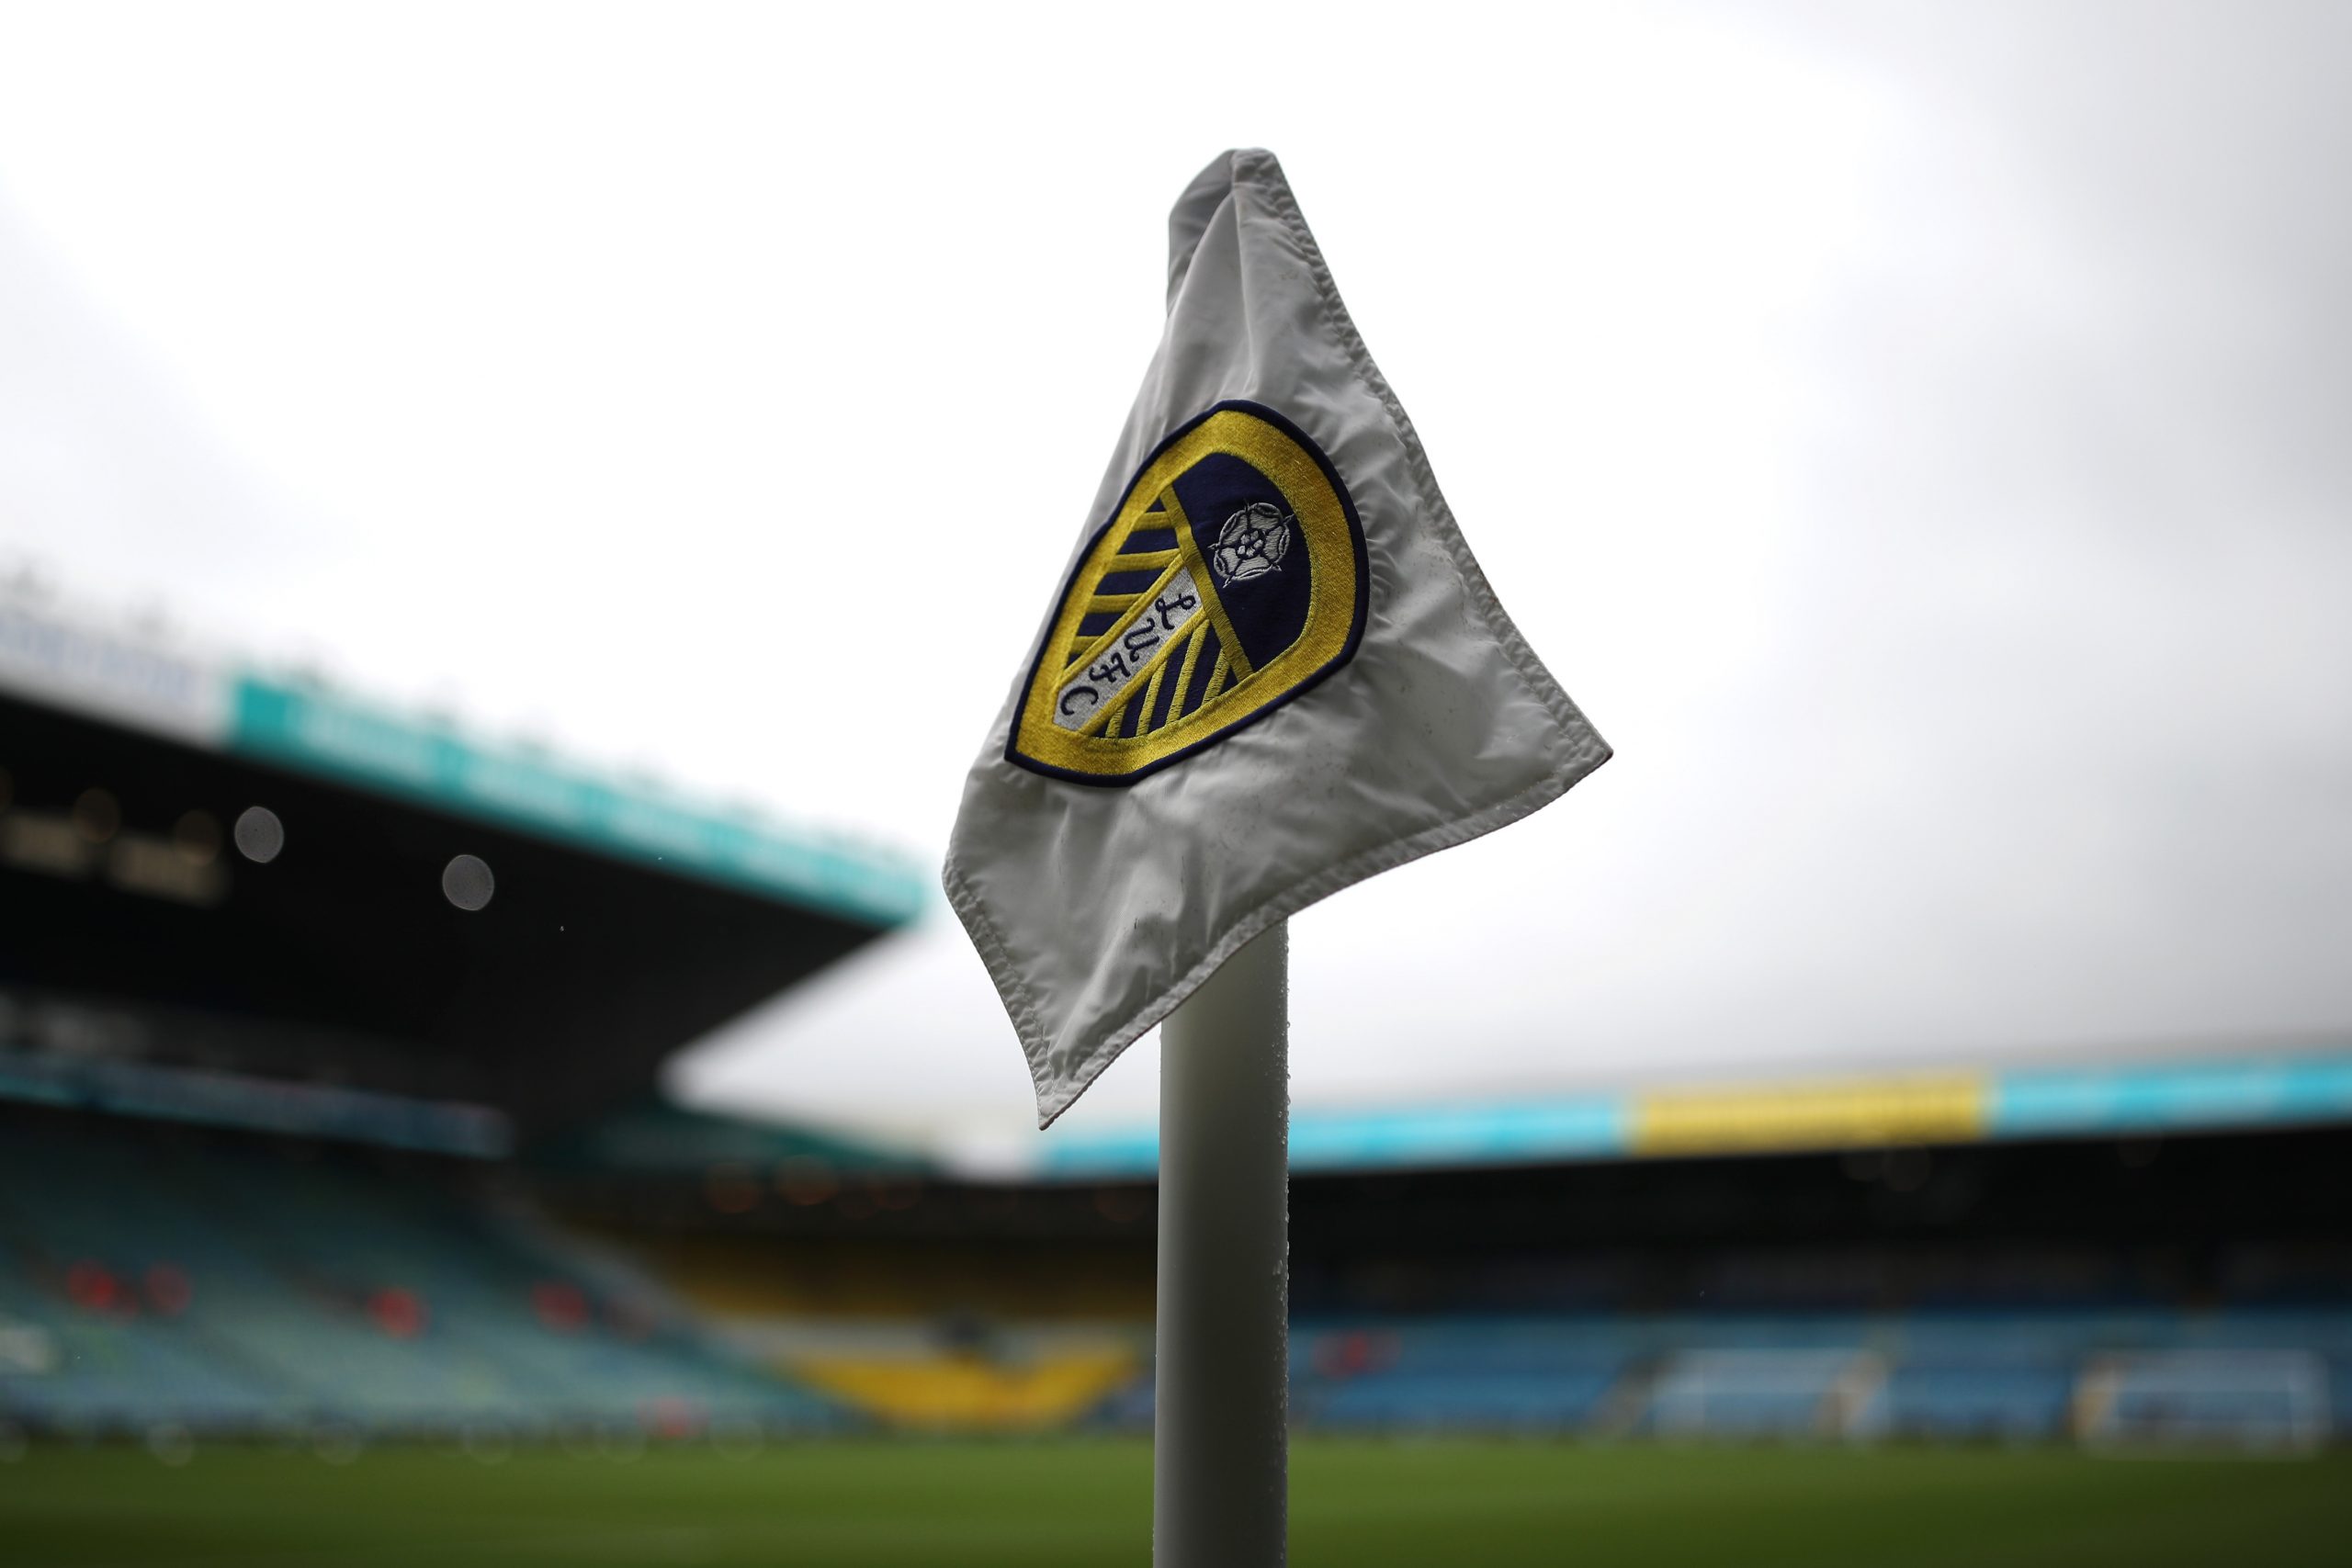 49ers; A detailed view of a corner flag prior to during the Premier League match between Leeds Unit...